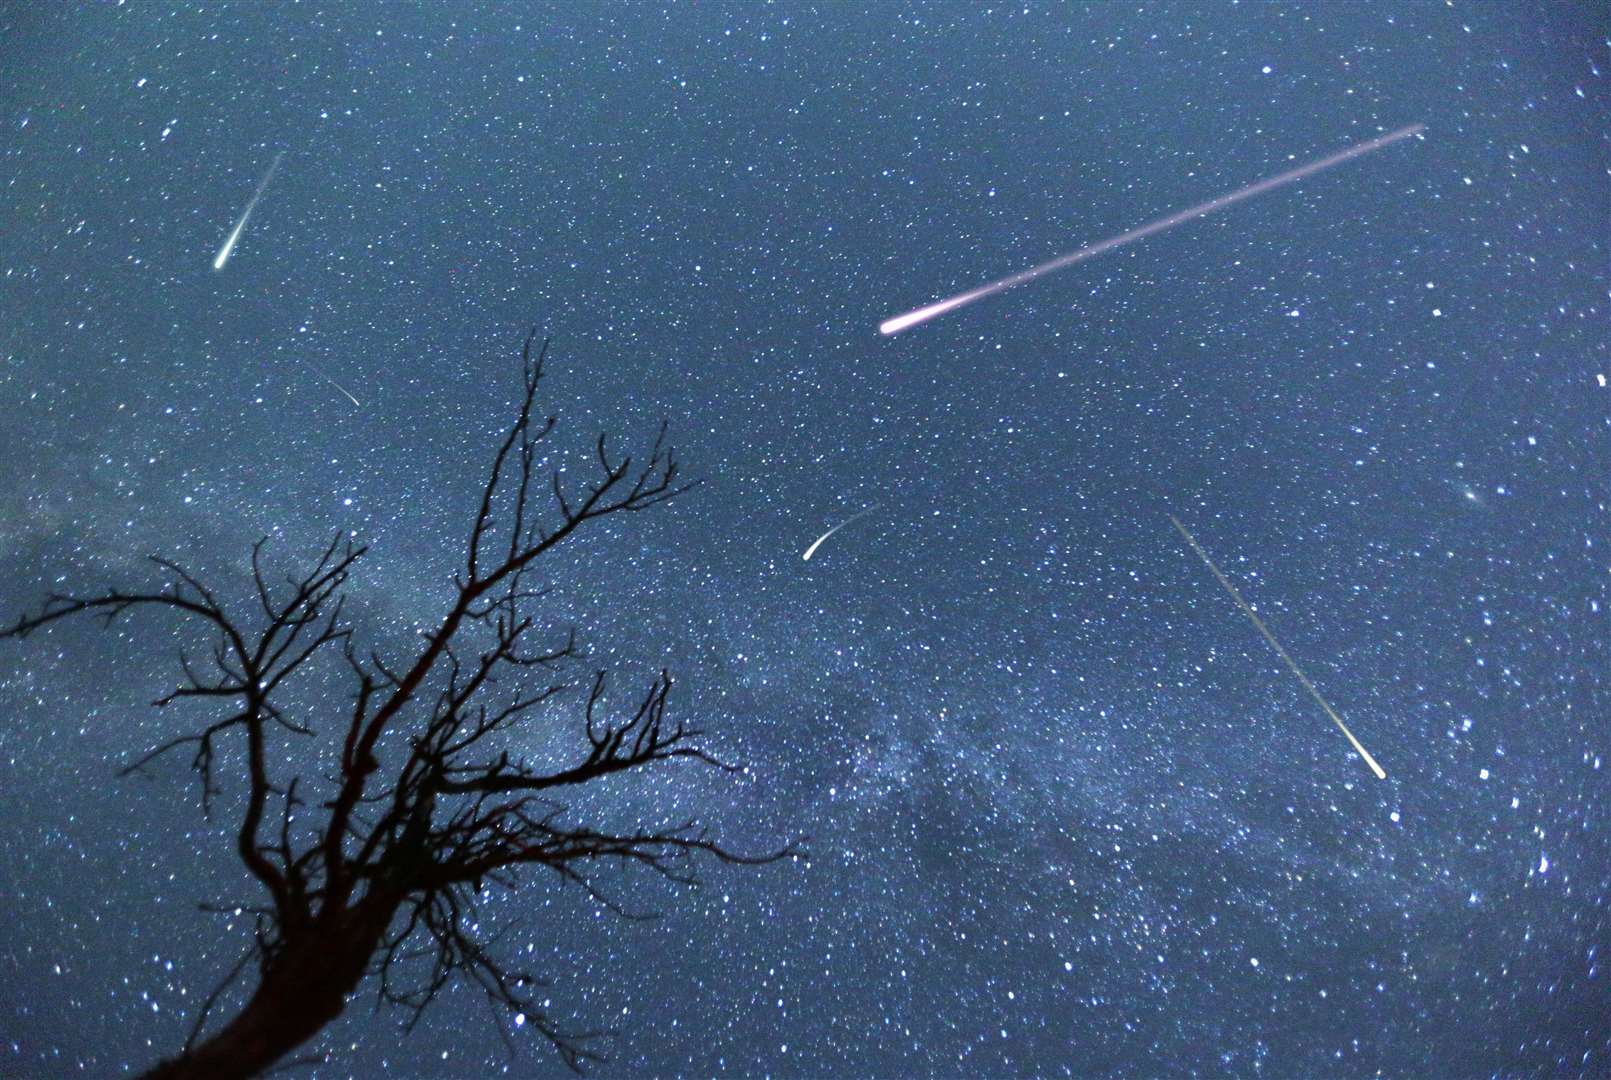 Astronomers think we could get an amazing display from the comet towards the end of the month